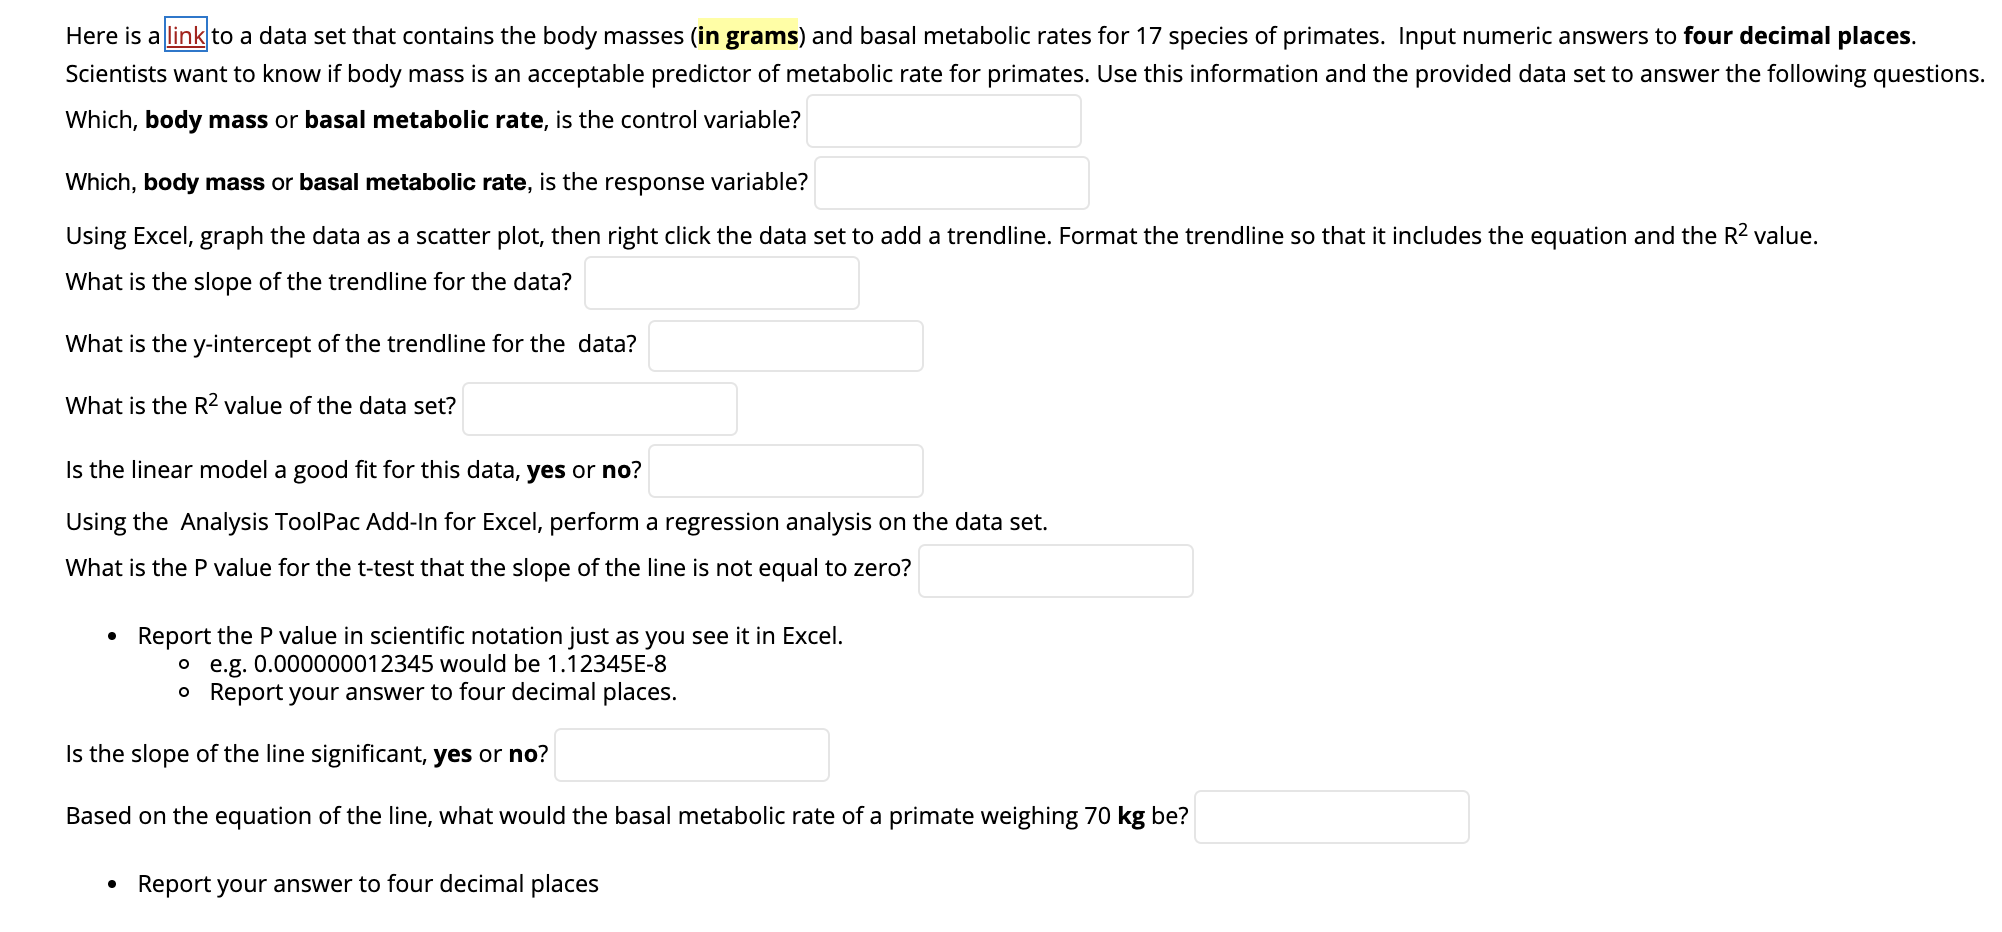 Here is a link to a data set that contains the body masses (in grams) and basal metabolic rates for 17 species of primates. Input numeric answers to four decimal places.
Scientists want to know if body mass is an acceptable predictor of metabolic rate for primates. Use this information and the provided data set to answer the following questions.
Which, body mass or basal metabolic rate, is the control variable?
Which, body mass or basal metabolic rate, is the
response variable?
Using Excel, graph the data as a scatter plot, then right click the data set to add a trendline. Format the trendline so that it includes the equation and the R2 value.
What is the slope of the trendline for the data?
What is the y-intercept of the trendline for the data?
What is the R2 value of the data set?
Is the linear model a good fit for this data, yes or no?
Using the Analysis ToolPac Add-In for Excel, perform a regression analysis on the data set.
What is the P value for the t-test that the slope of the line is not equal to zero?
Report the P value in scientific notation just as you see it in Excel.
o e.g. 0.000000012345 would be 1.12345E-8
o Report your answer to four decimal places.
Is the slope of the line significant, yes or no?
Based on the equation of the line, what would the basal metabolic rate of a primate weighing 70 kg be?
• Report your answer to four decimal places
